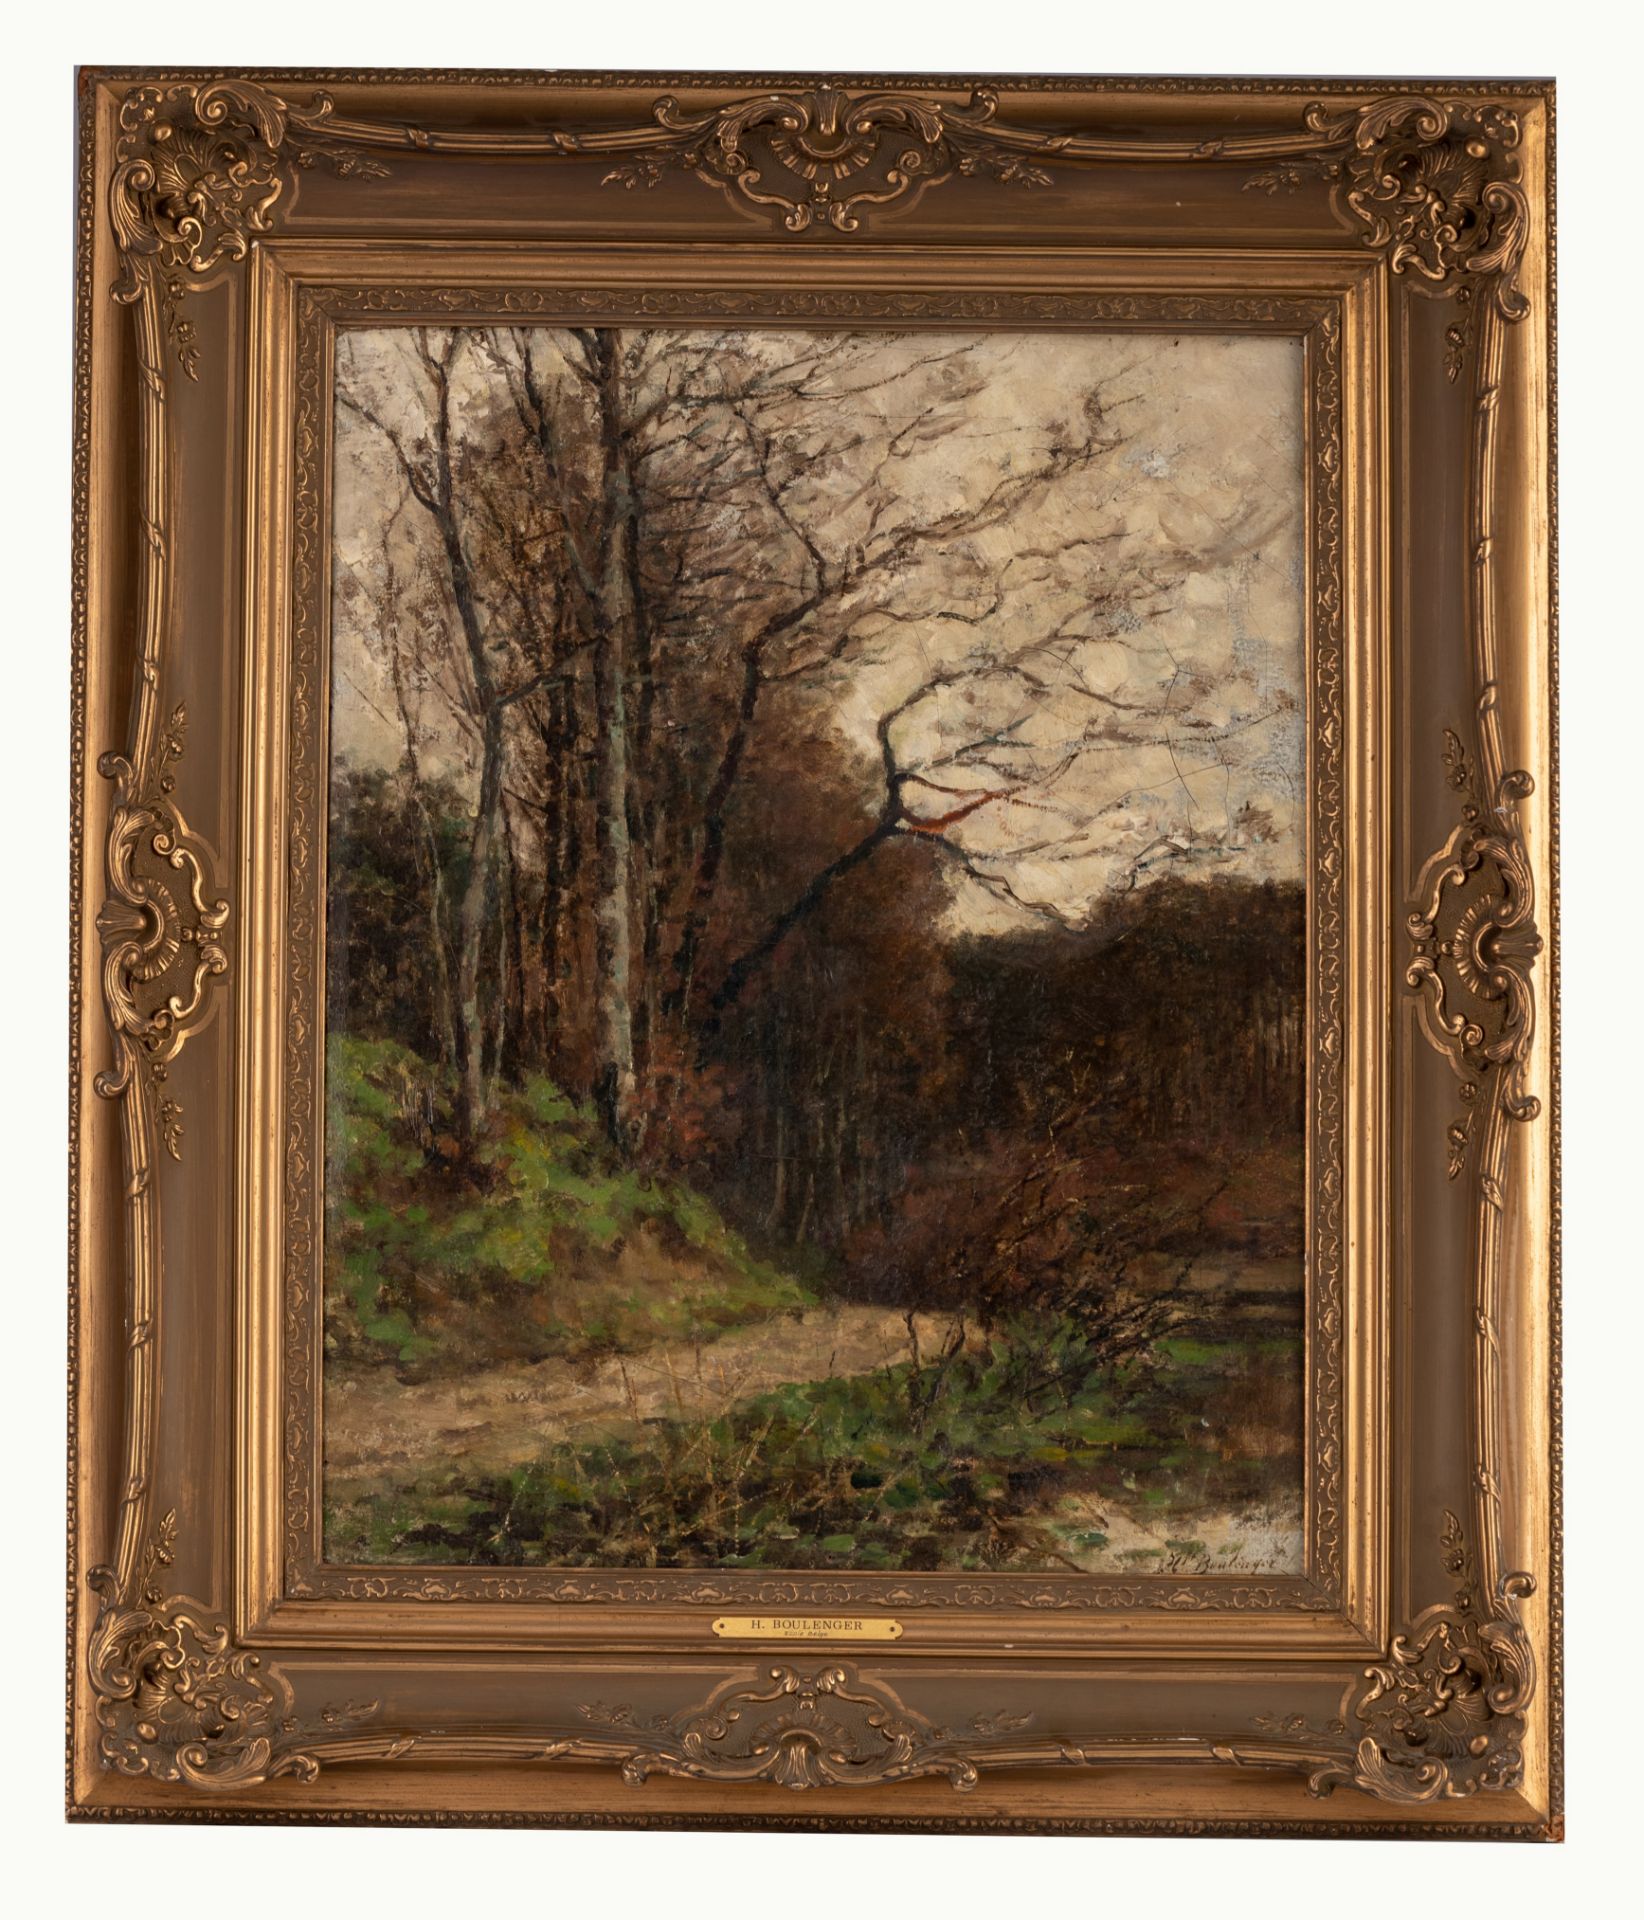 Hyppolite Boulanger (1837-1874), winter forest view, oil on canvas, 52 x 66 cm - Image 2 of 6